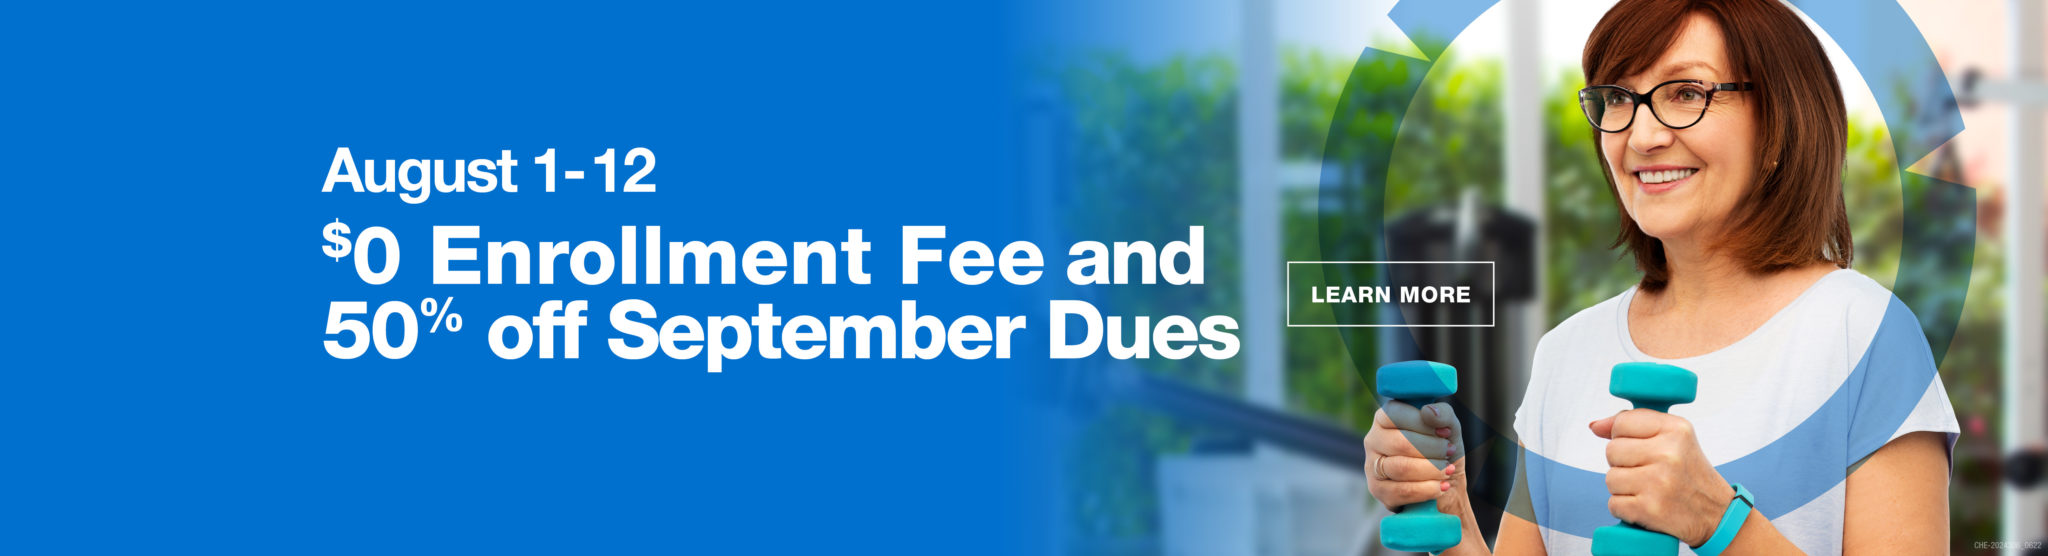 Join Monday, August 1 - Friday, August 12: $0 enrollment and 50% off September dues!